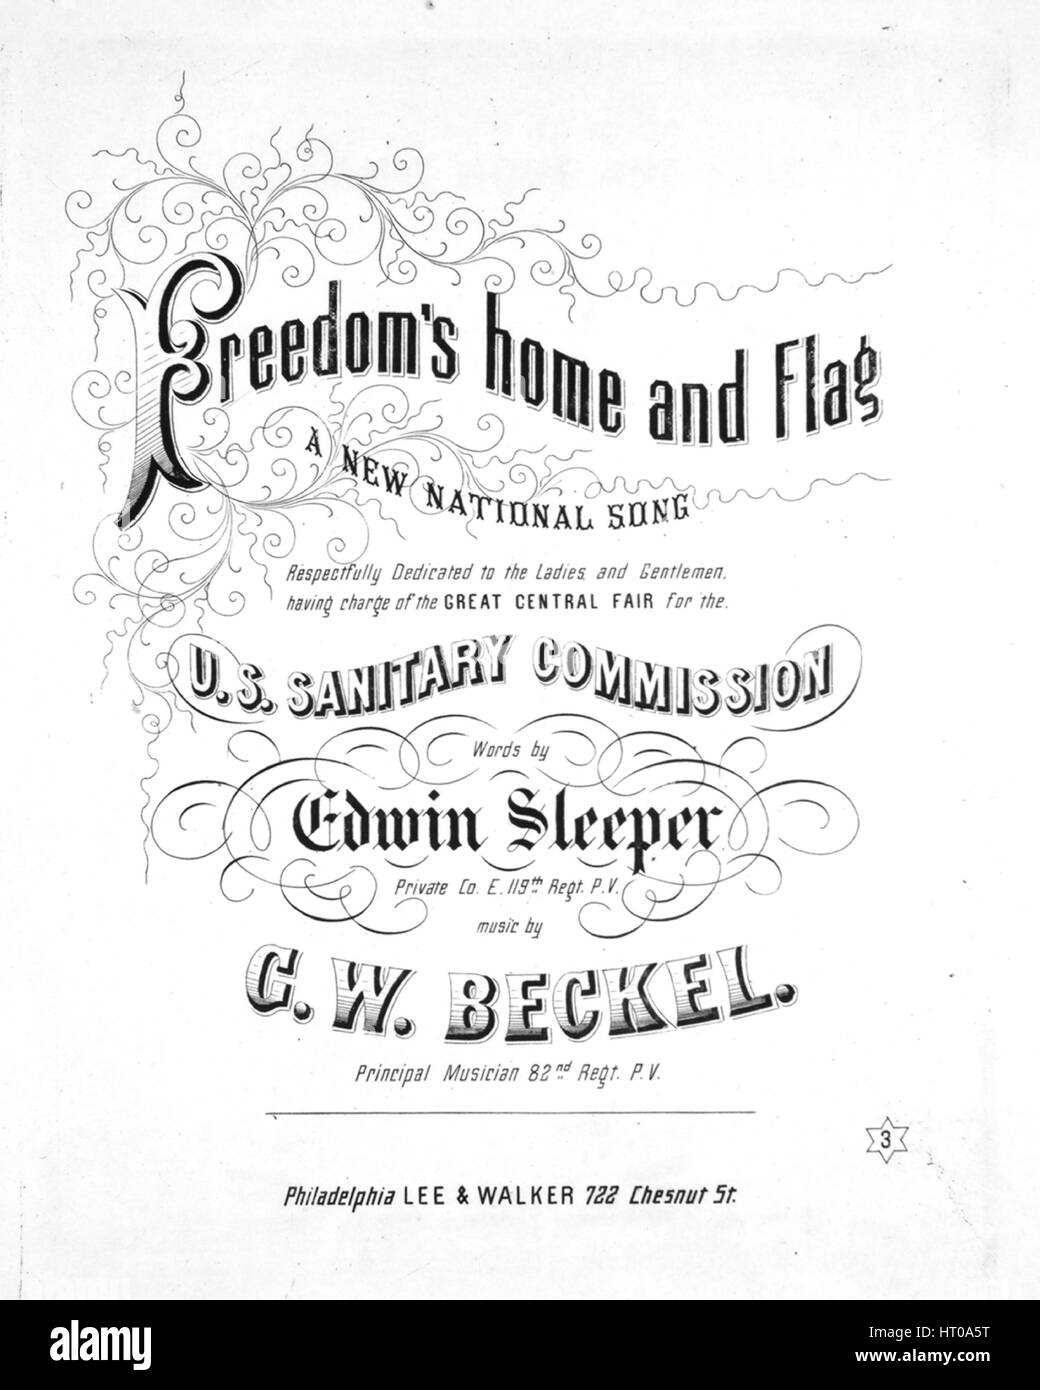 Sheet music cover image of the song 'Freedom's Home and Flag A New National Song', with original authorship notes reading 'Words by Edwin Sleeper, Private Co E 119th, Regt PV Music by GW Beckel, Principal Musician 82nd Regt PV', United States, 1864. The publisher is listed as 'Lee and Walker, 722 Chesnut St.', the form of composition is 'strophic with chorus', the instrumentation is 'piano and voice', the first line reads 'When freedom long in thraldom lain, and crush'd to earth by tyrant's feet', and the illustration artist is listed as 'None'. Stock Photo